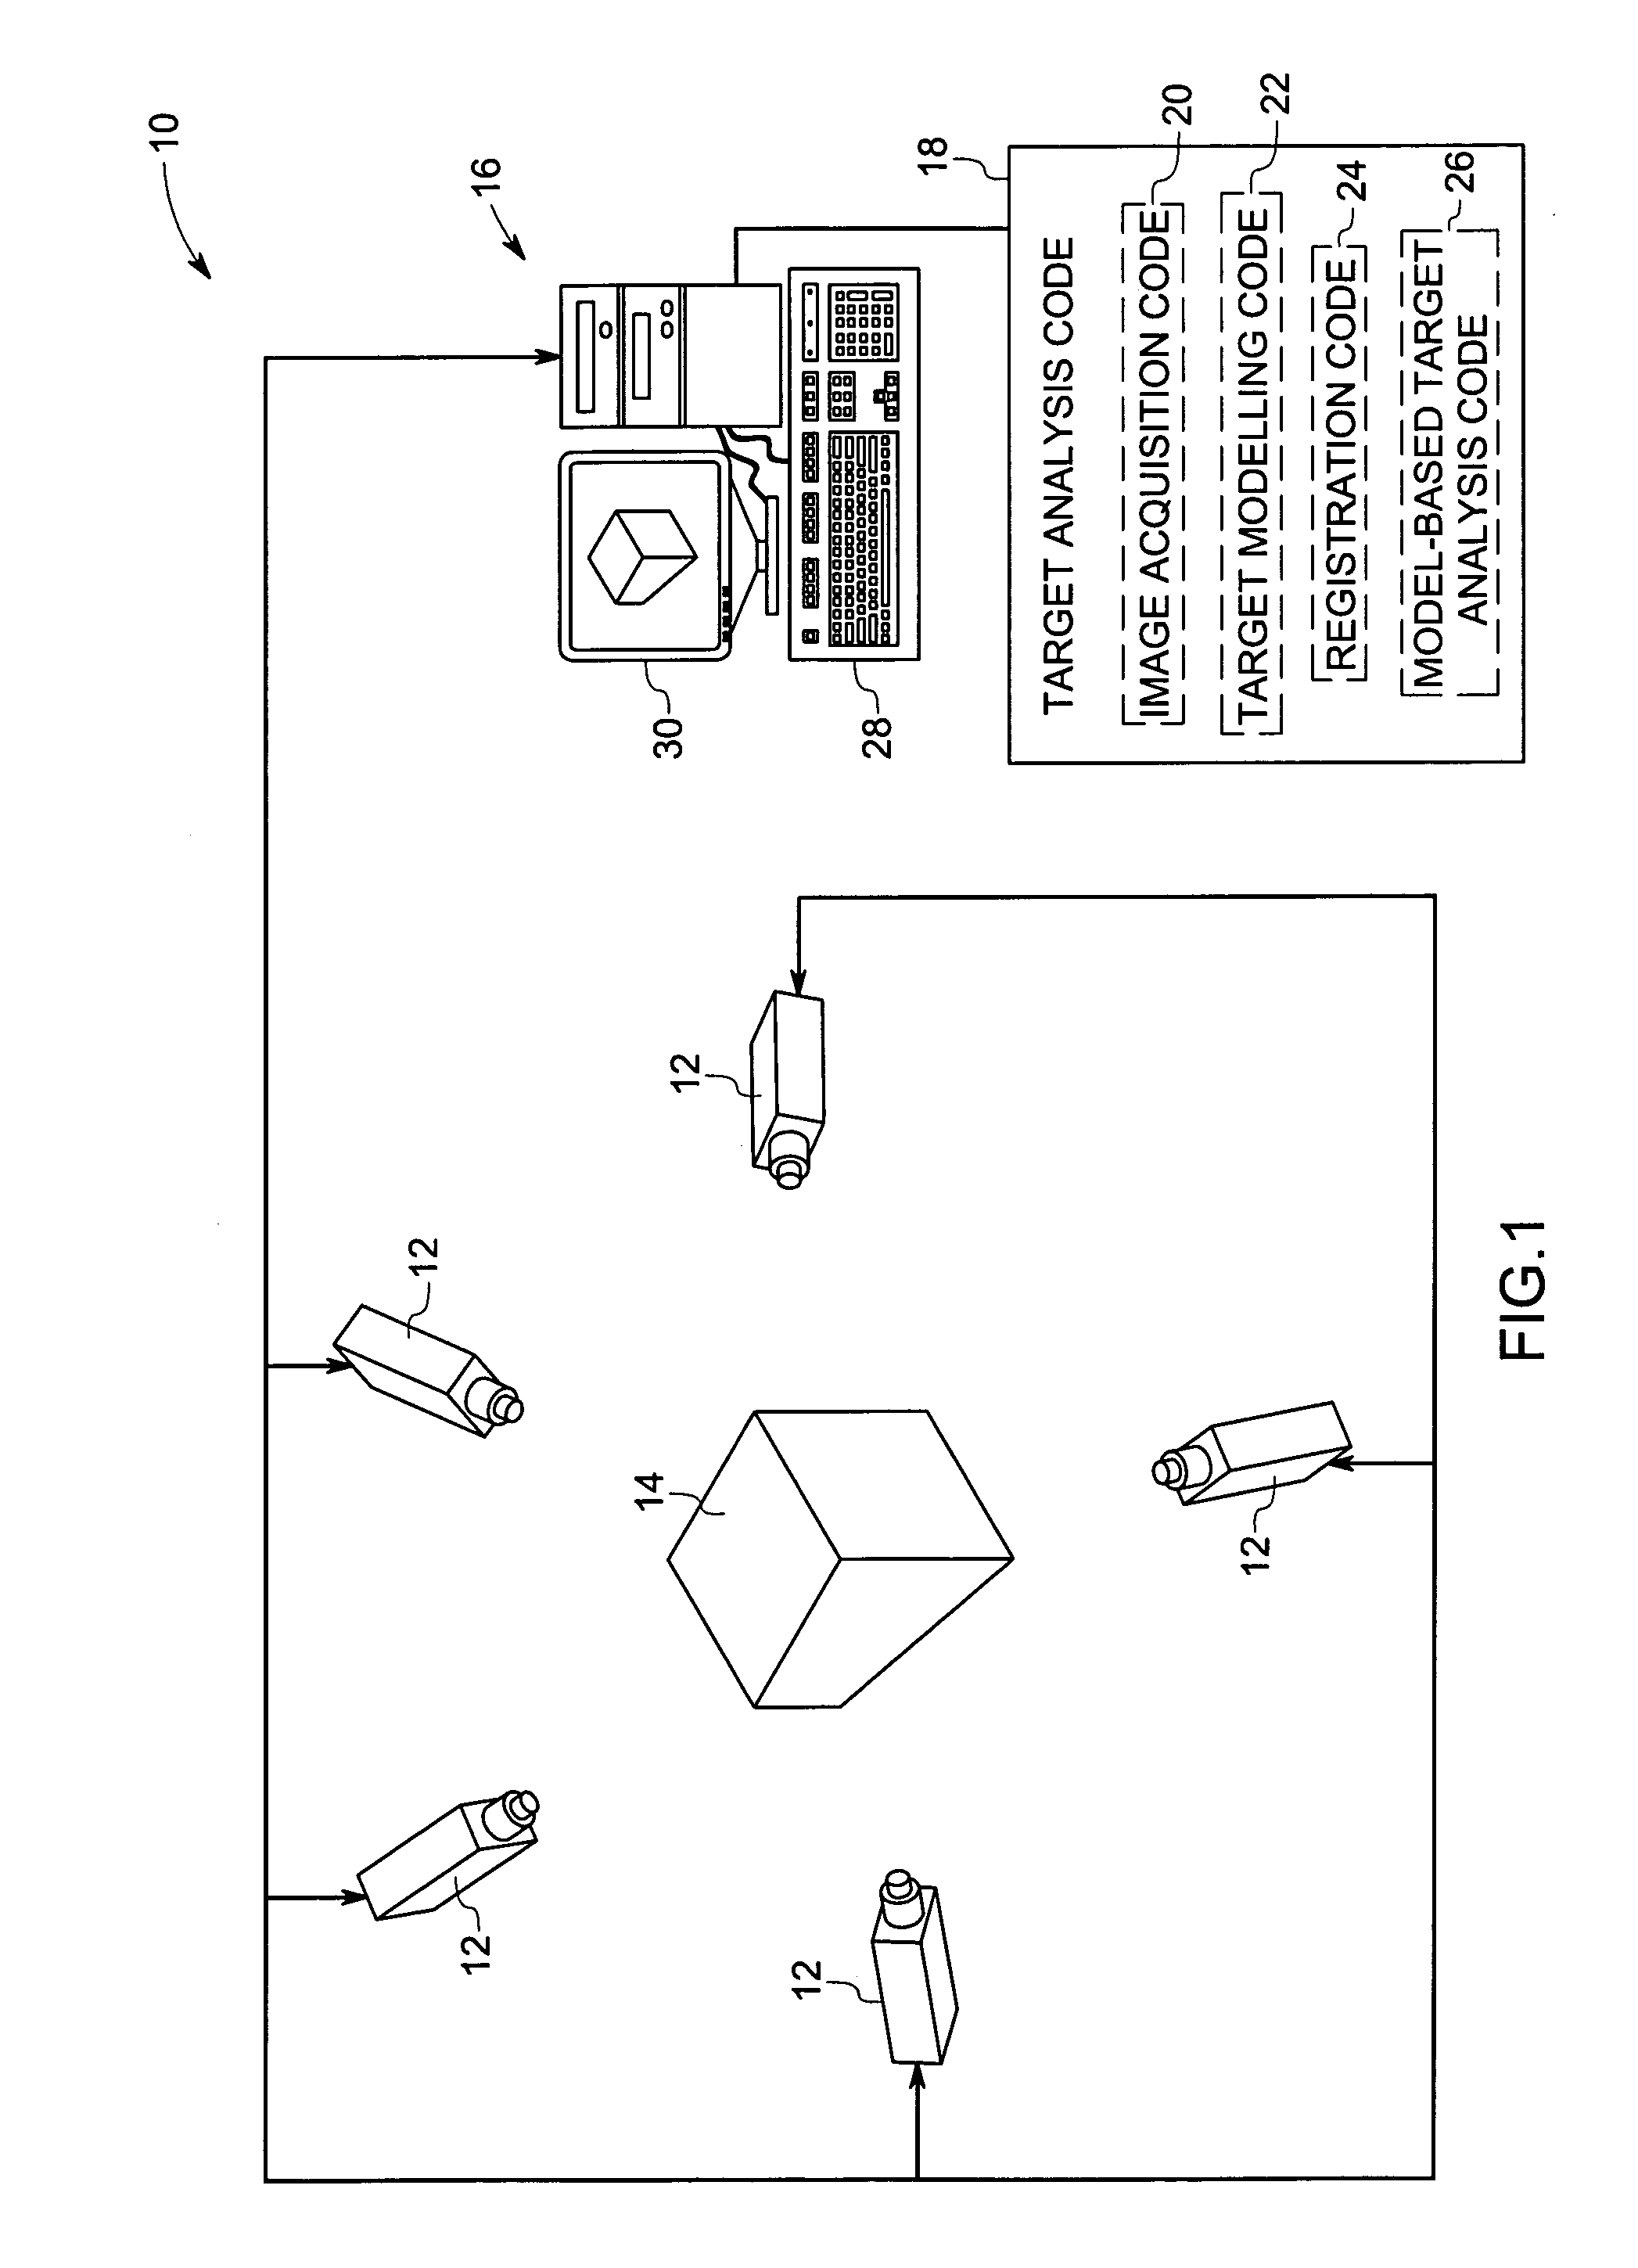 System and method for object measurement